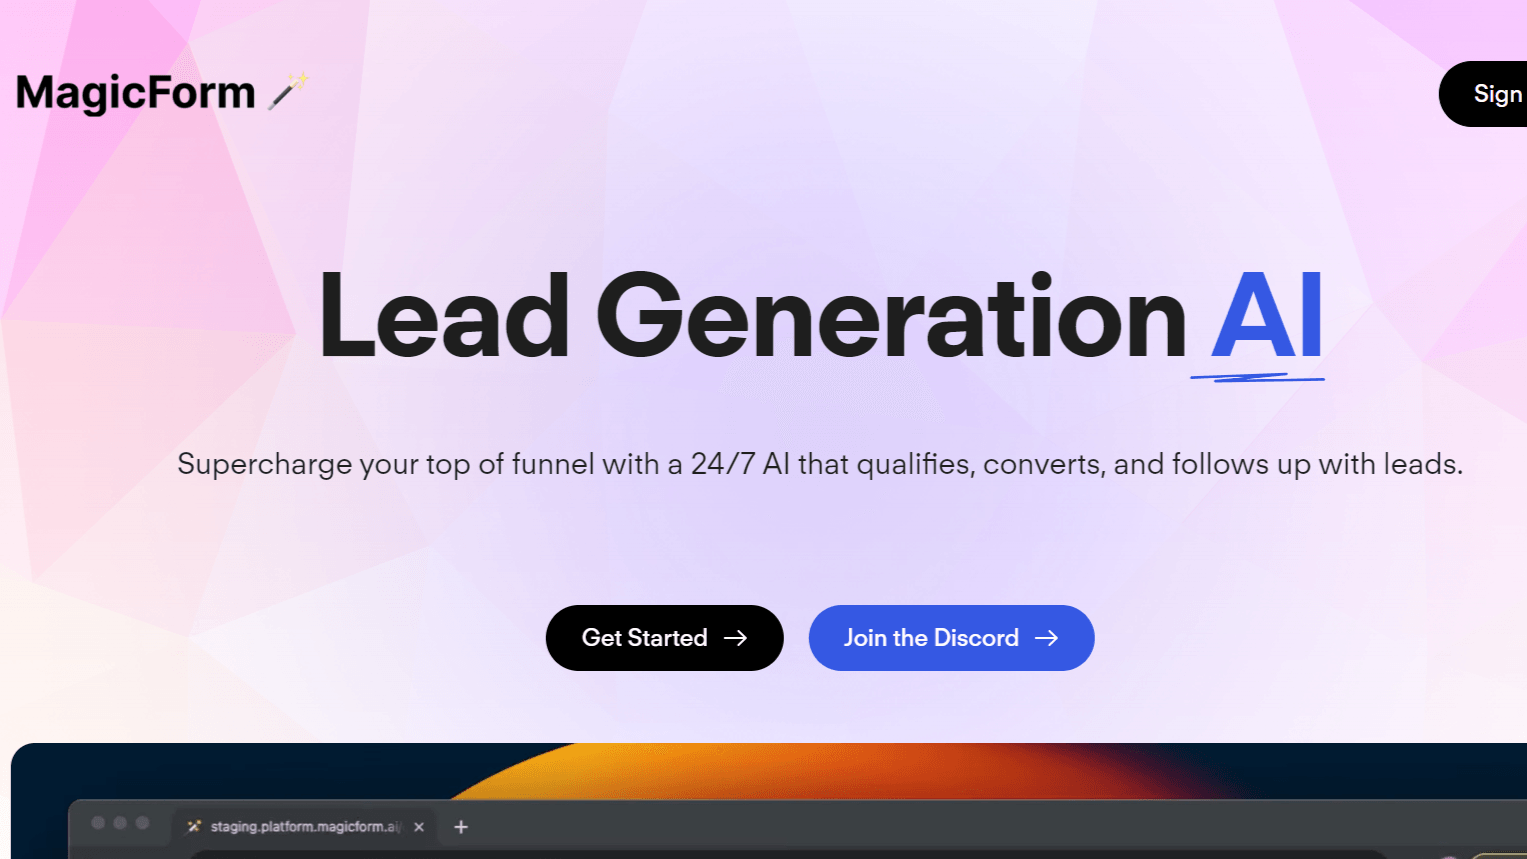 MagicForm - for Your Lead Generation Needs